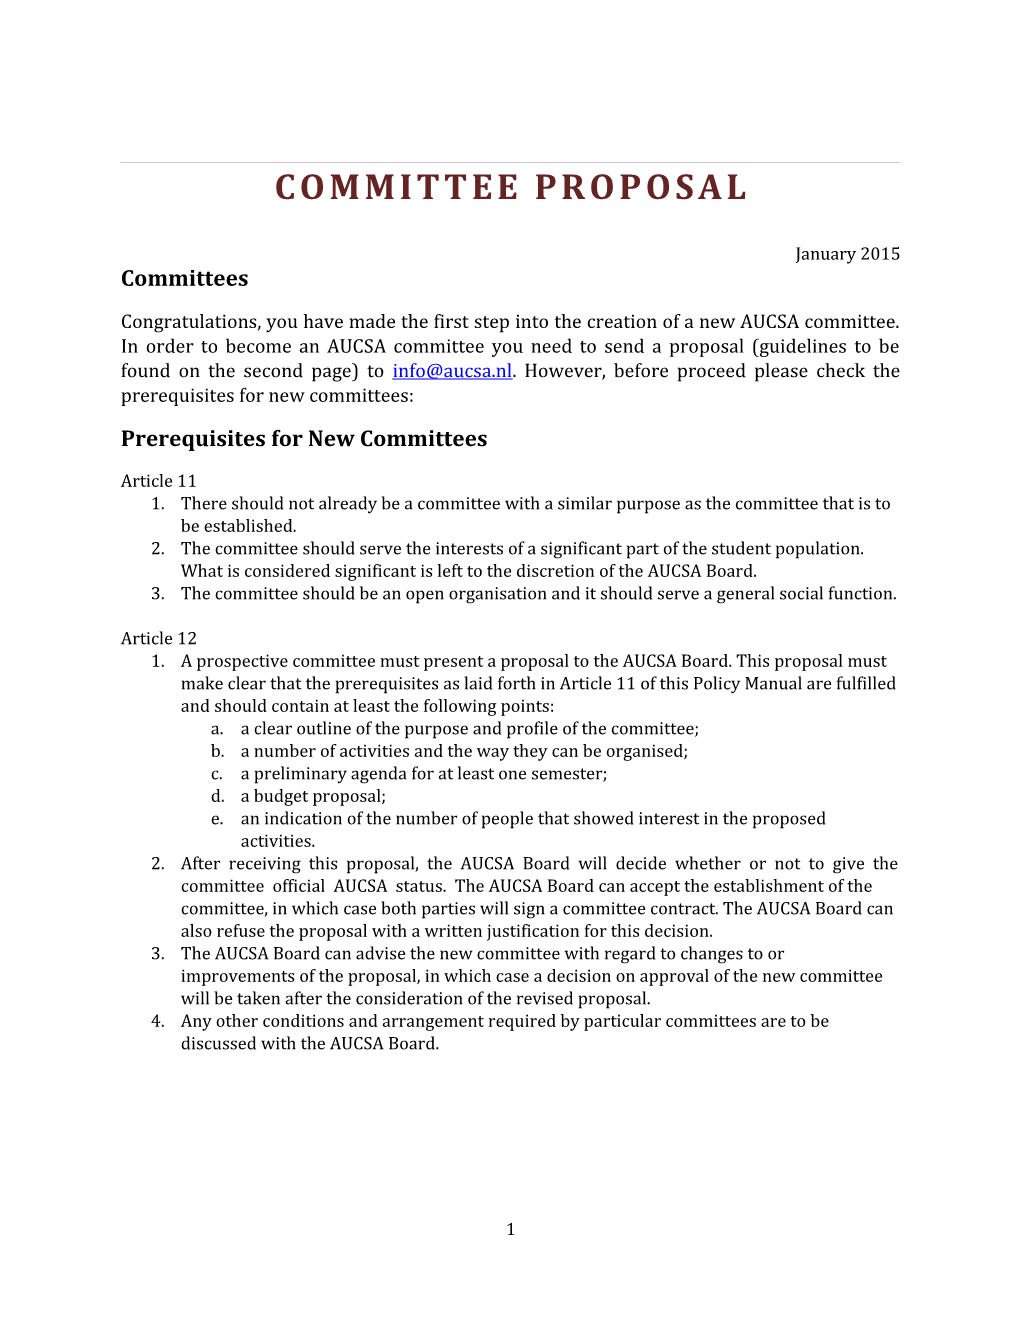 Prerequisites for New Committees